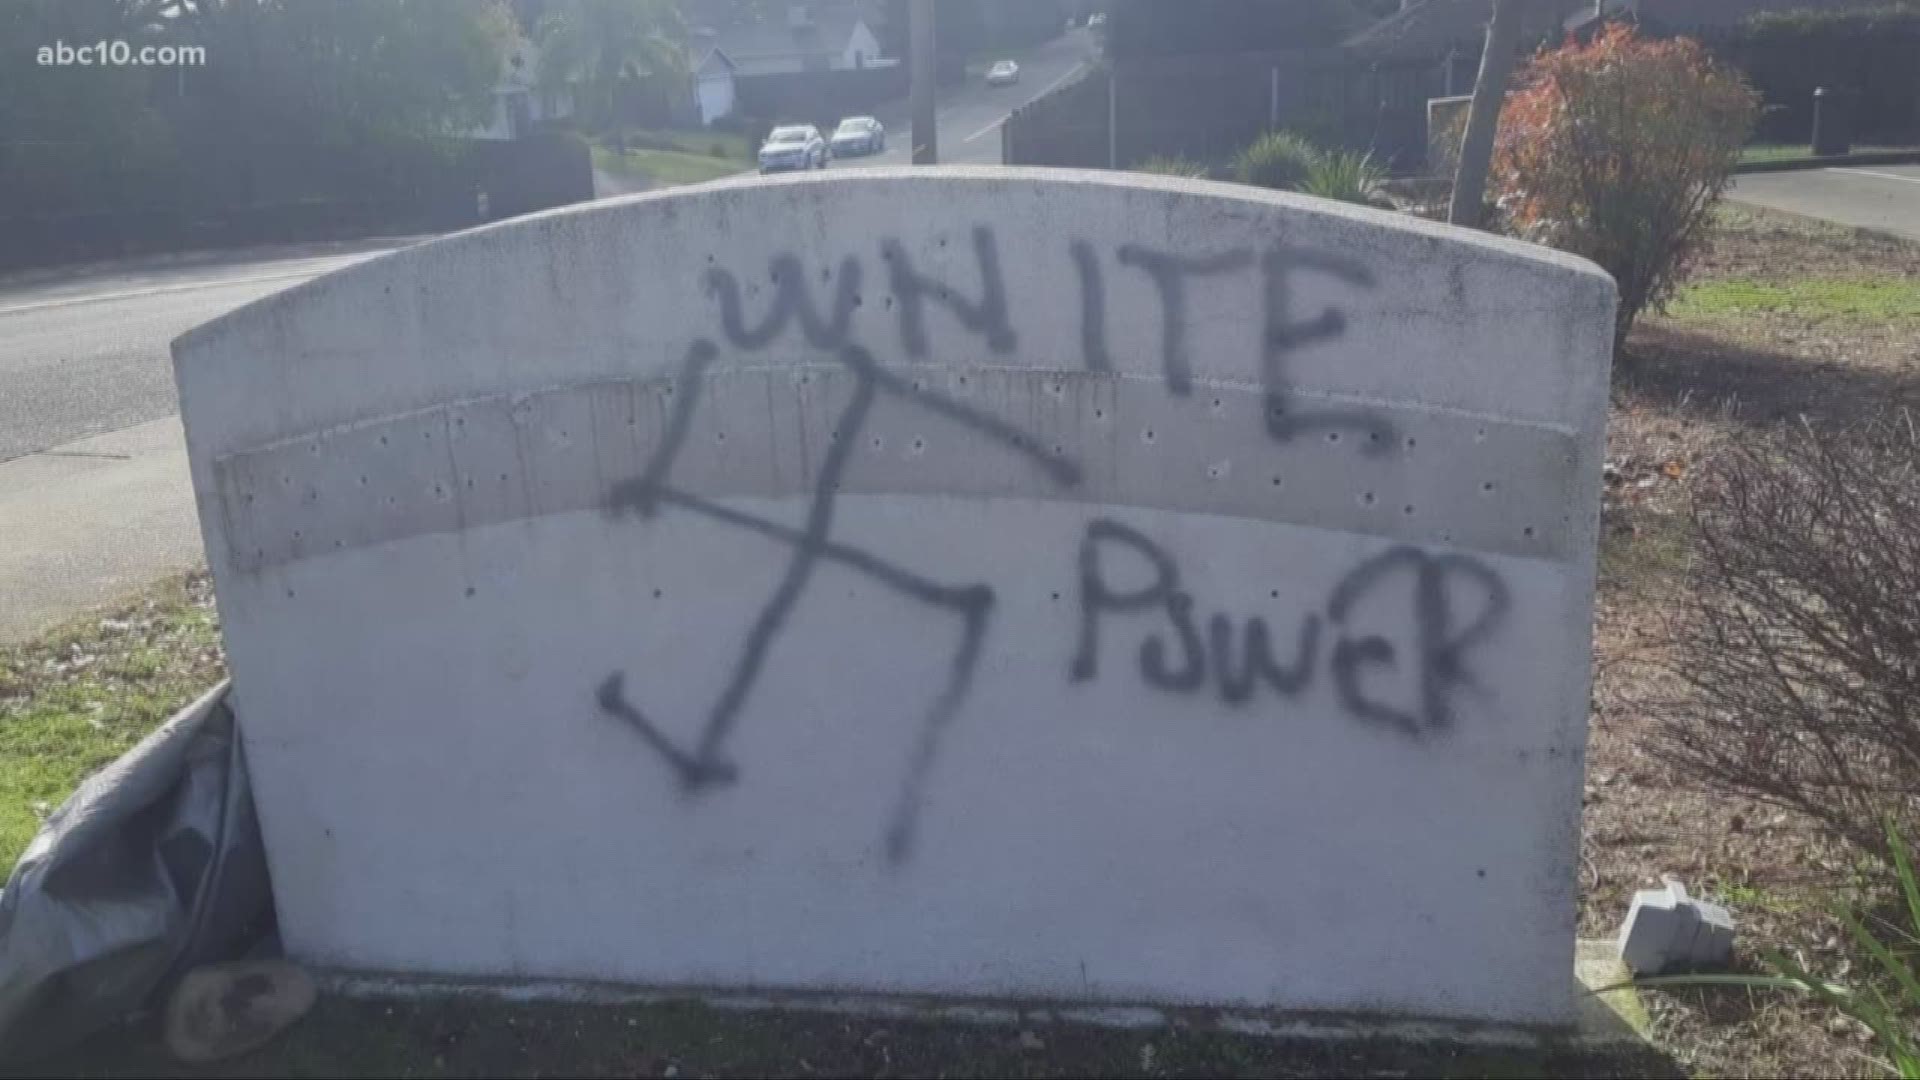 Overnight, someone vandalized a sign in front of the building, drawing a swastika and writing “white power” in spray paint.